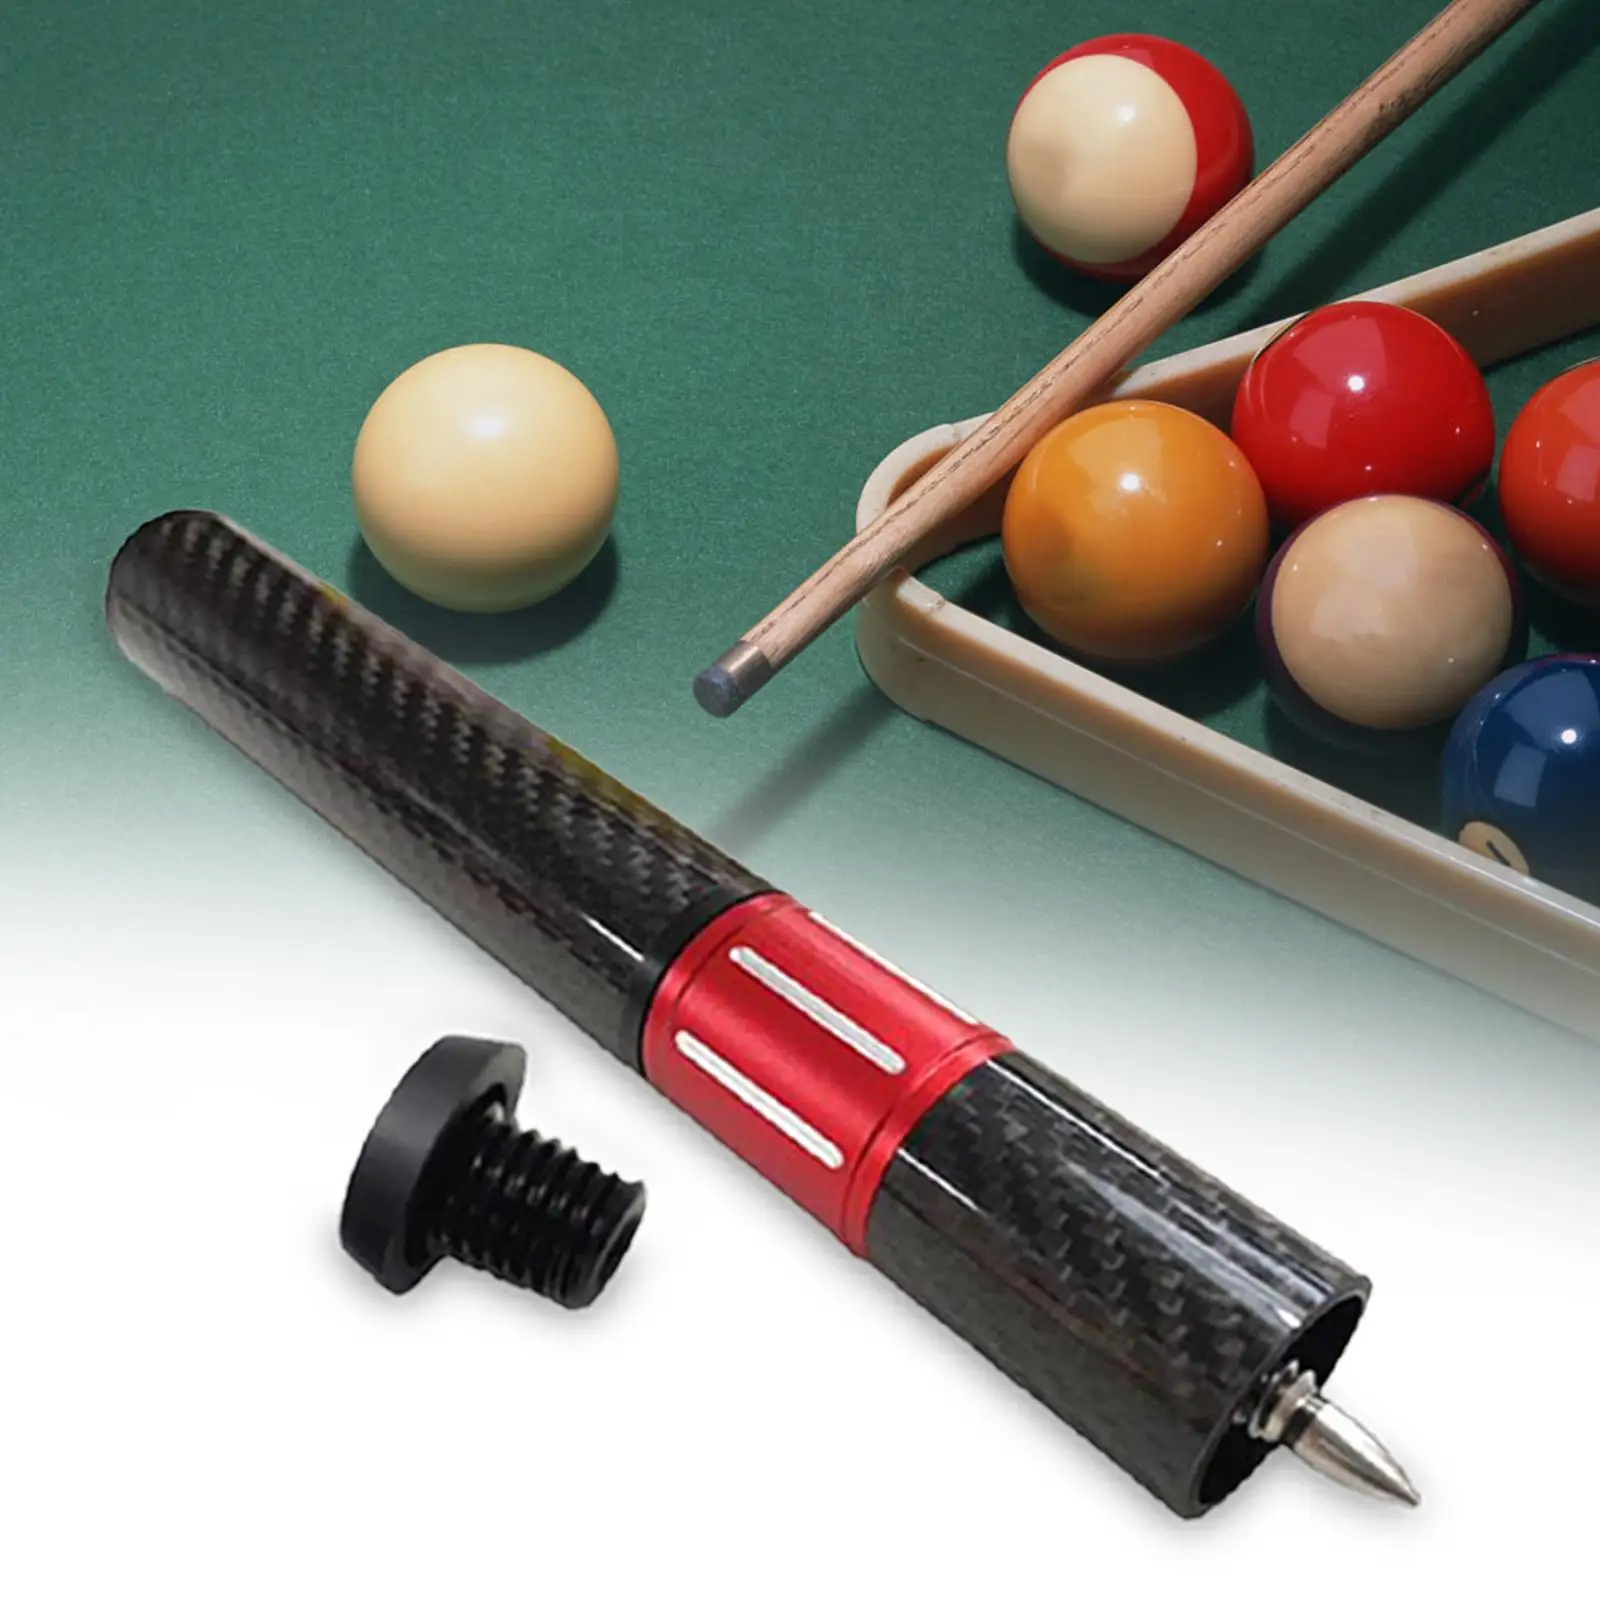 Billiards Pool Cue Extension with Bumper Compact Snooker Cue Stick Cue End Extender Adapter for Player Billiard Cues Practice